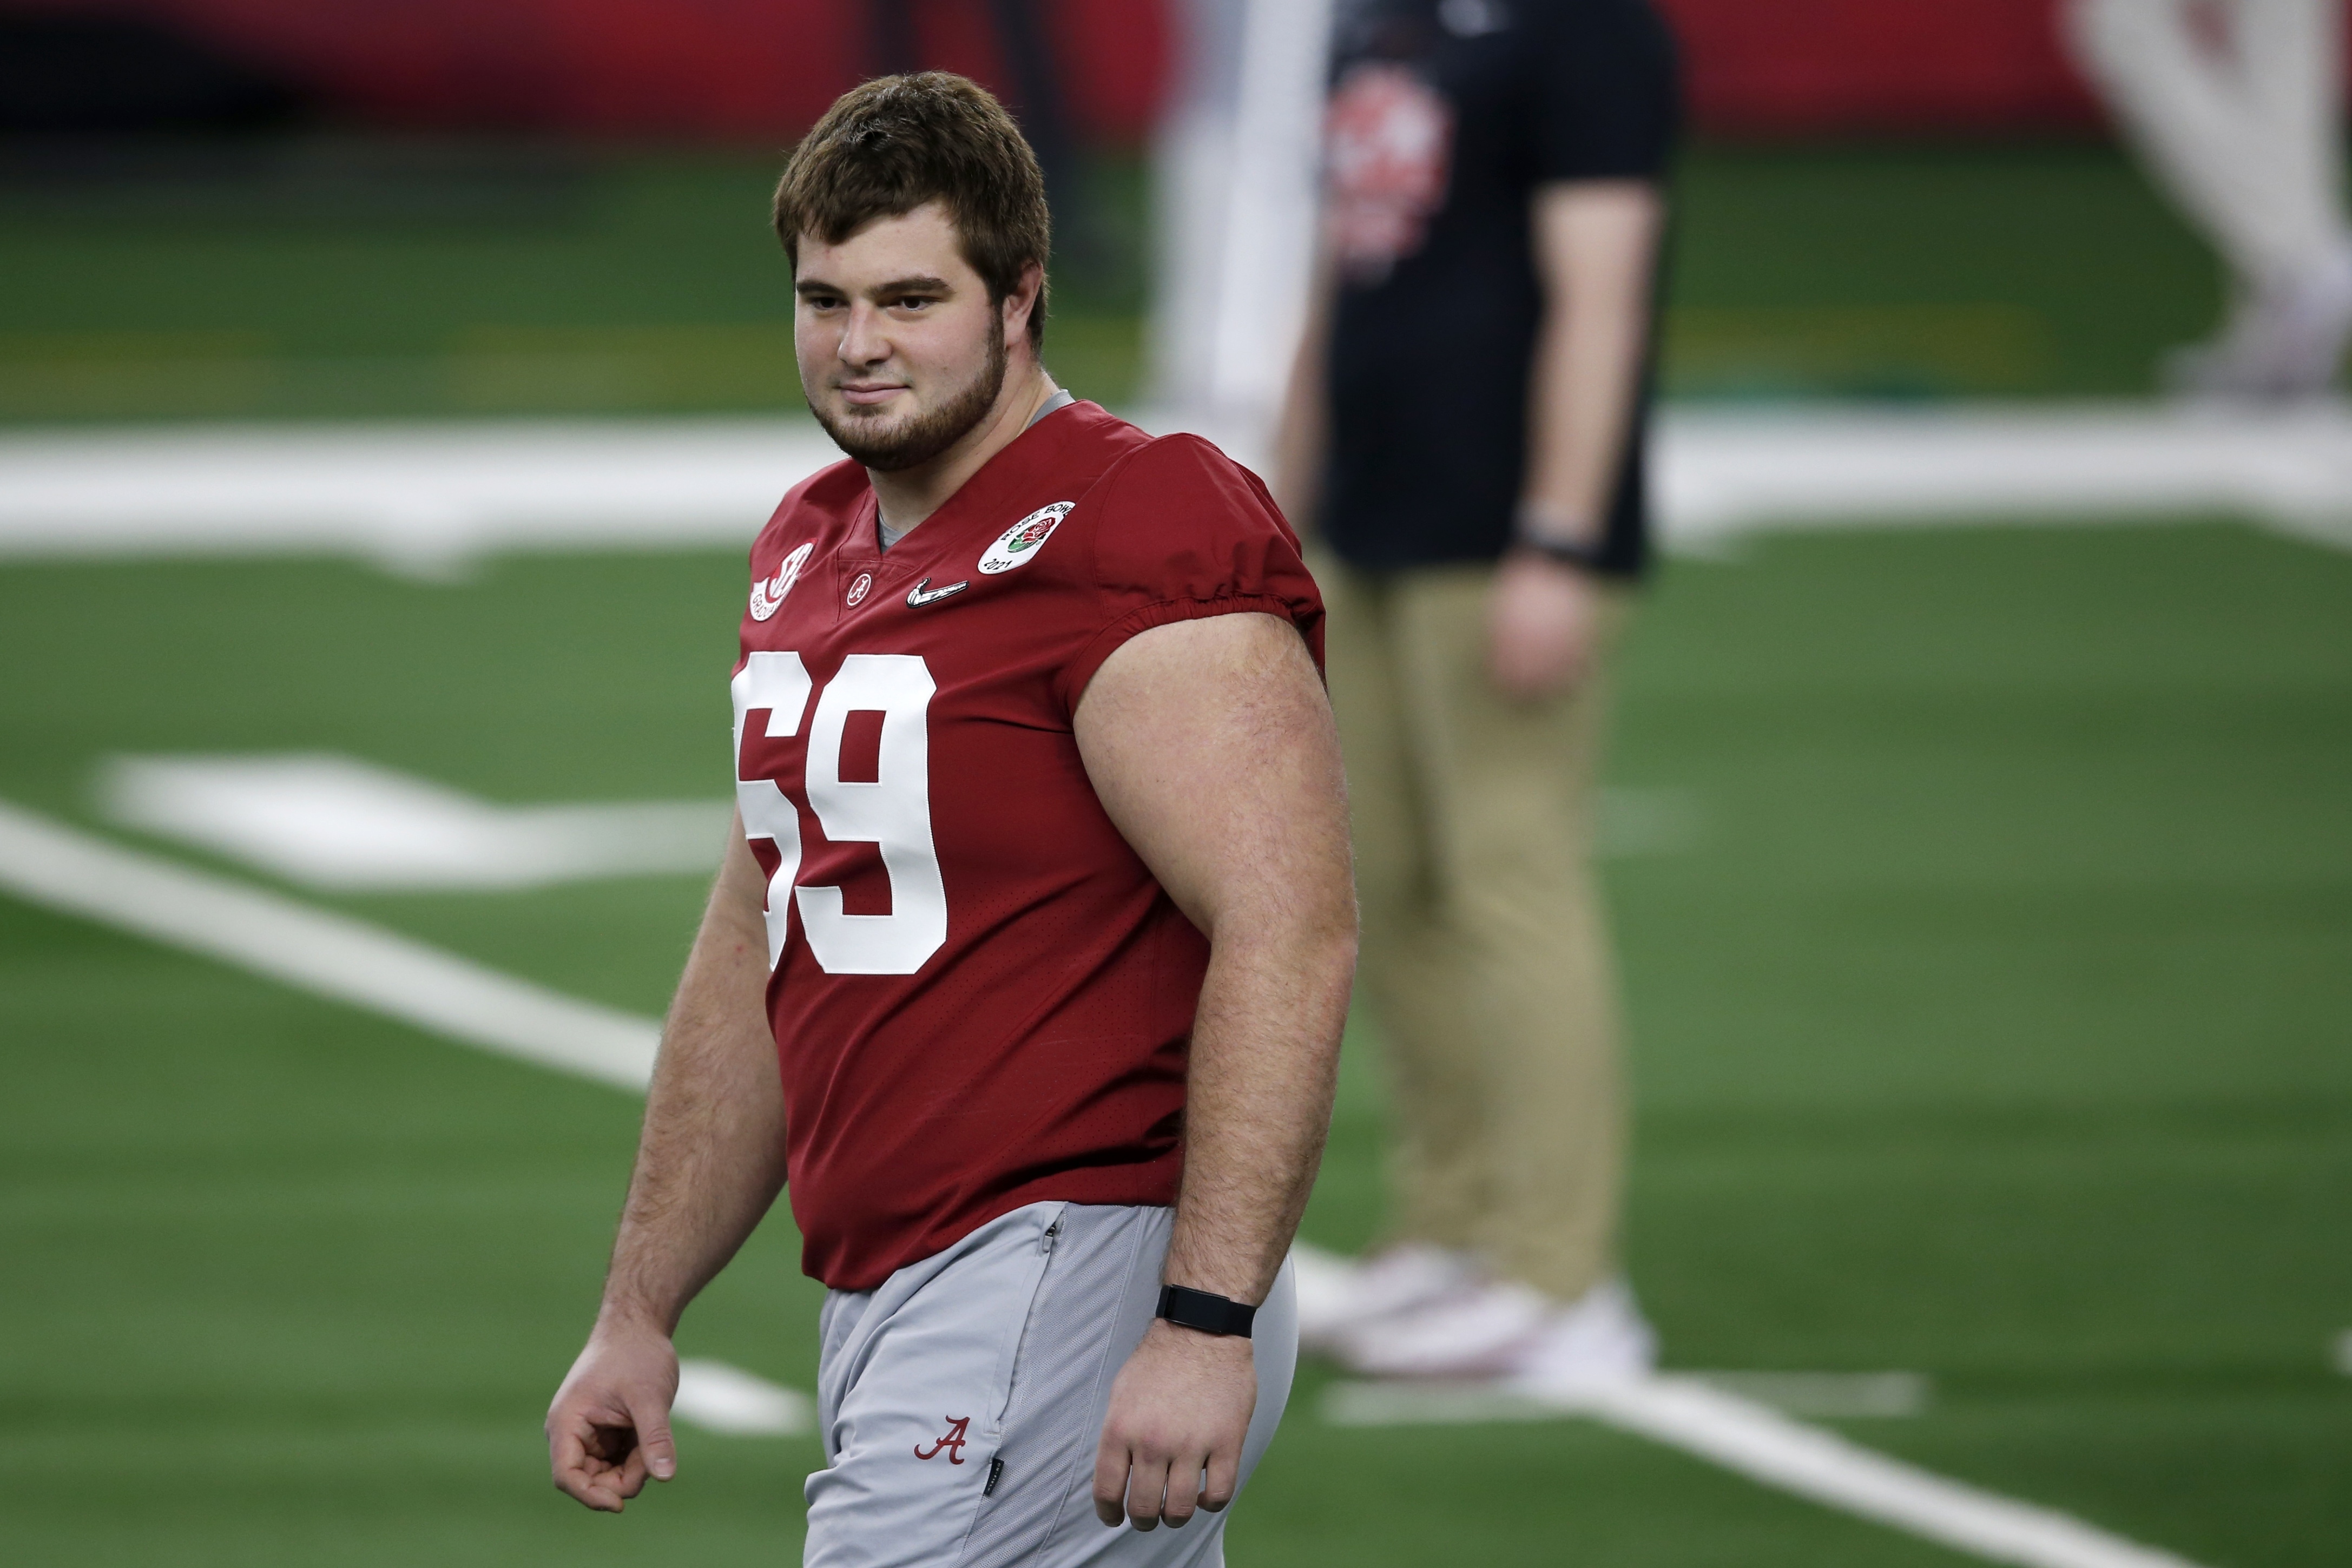 NFL Draft 2021: Eagles select Alabama's Landon Dickerson in 2nd round